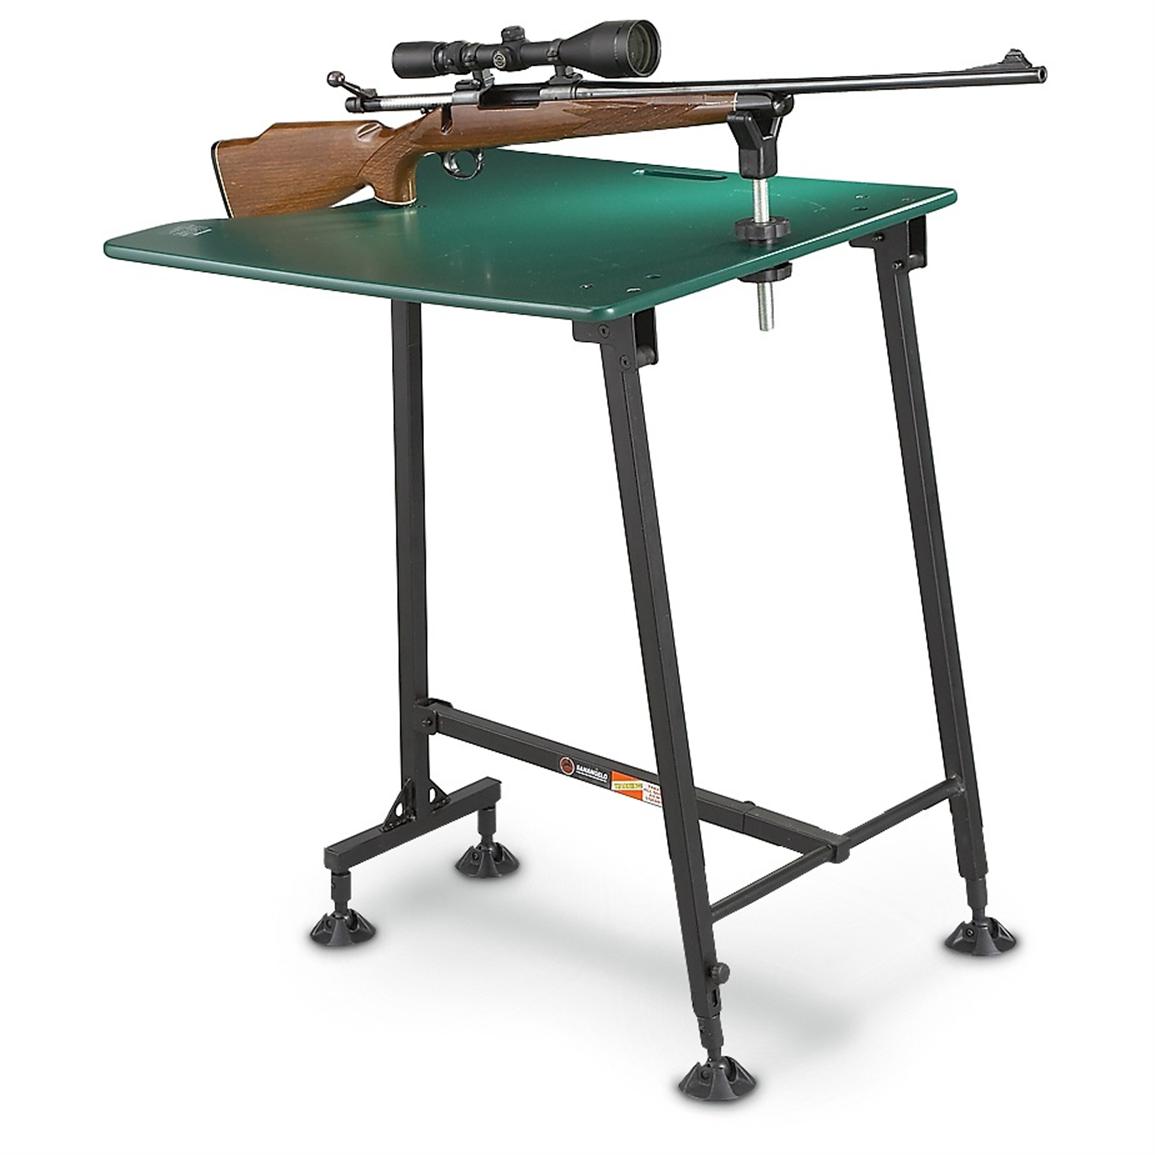 Portable SHOOTING BENCH REST Seat Table Rifle Gun Hunting Game Outdoor Foldable 